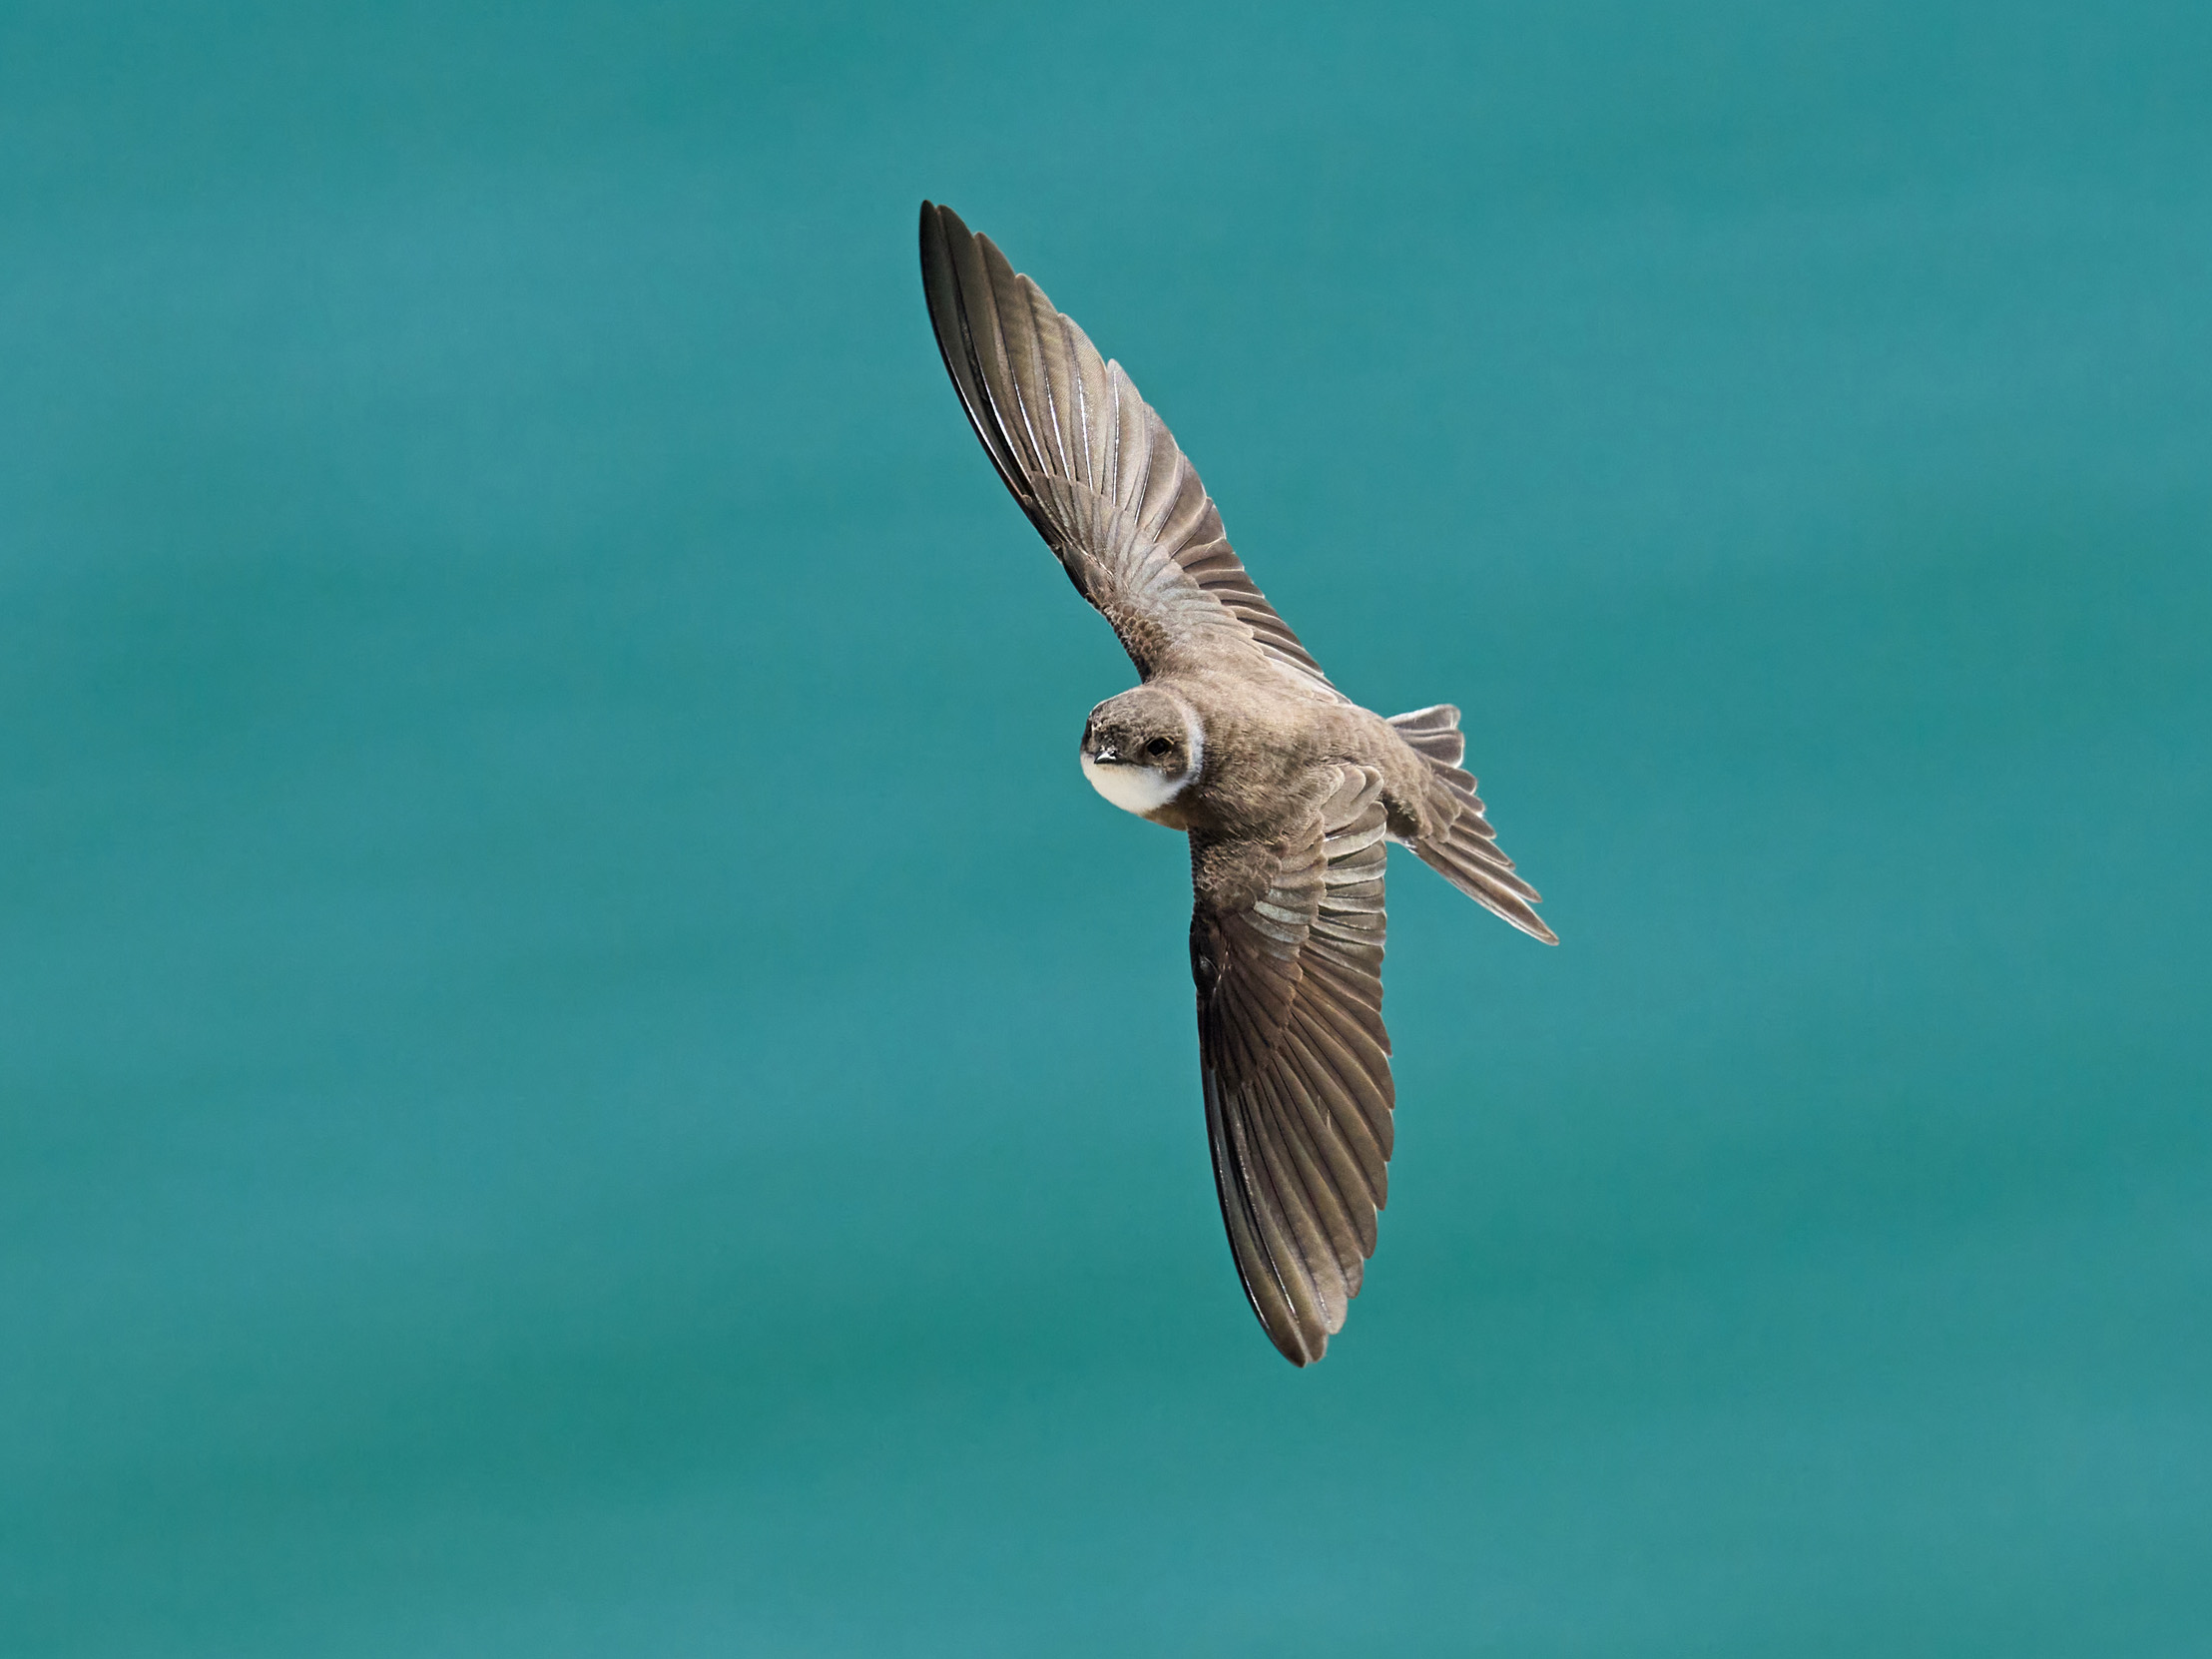 A lone Sand Martin flying over a body of water.